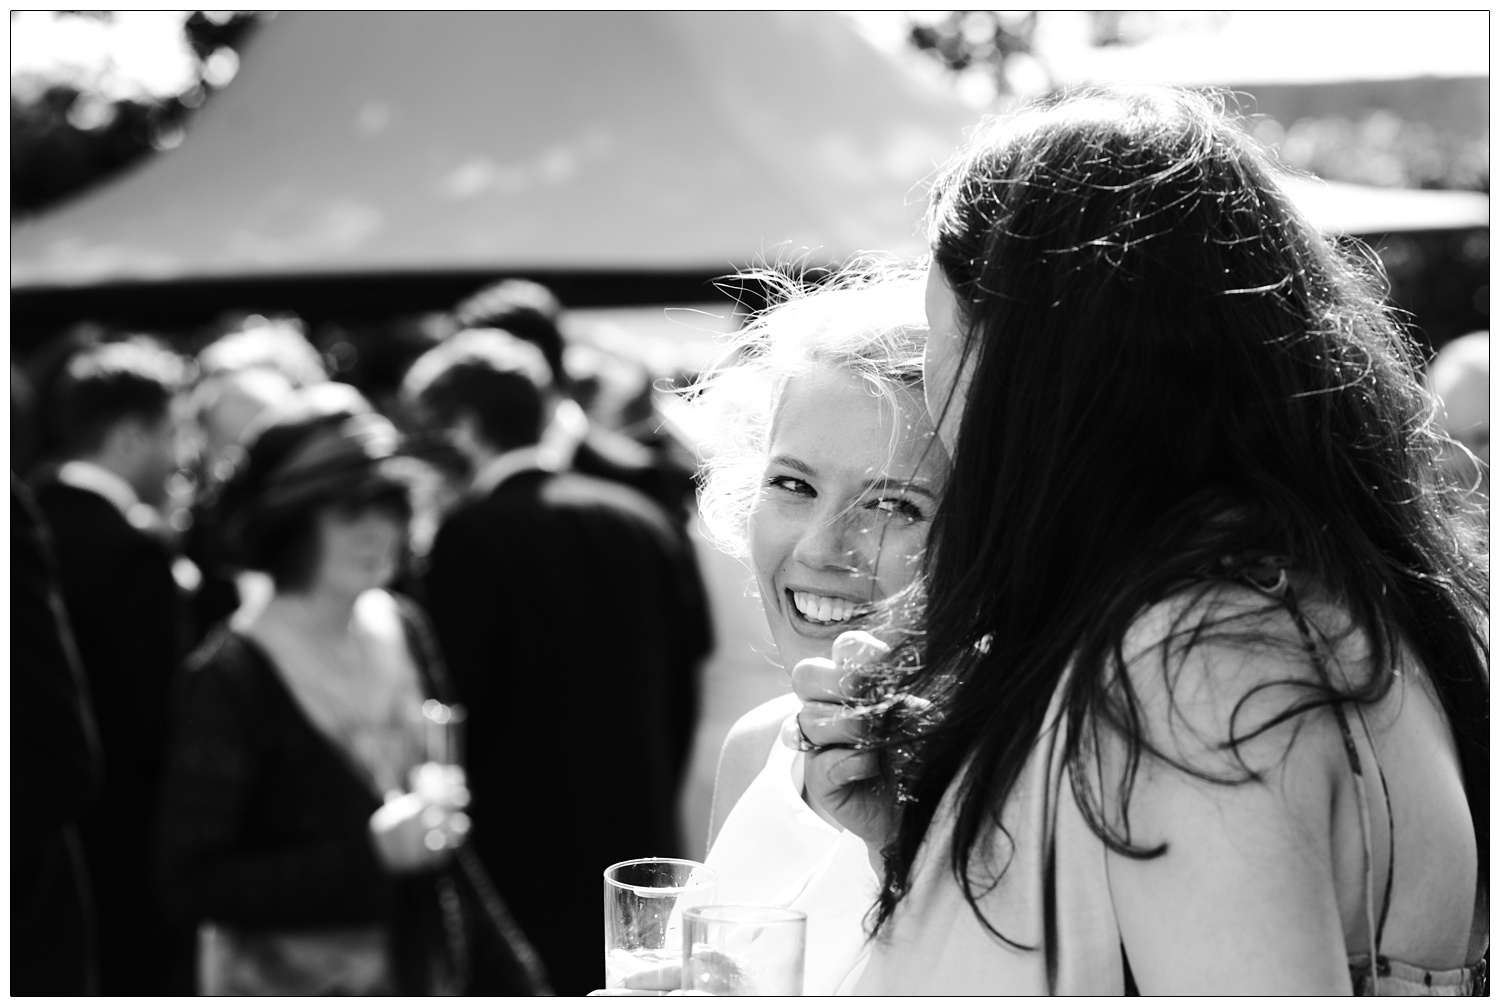 A candid wedding photograph of the bride smiling at a friend outside. They are both holding drinks.